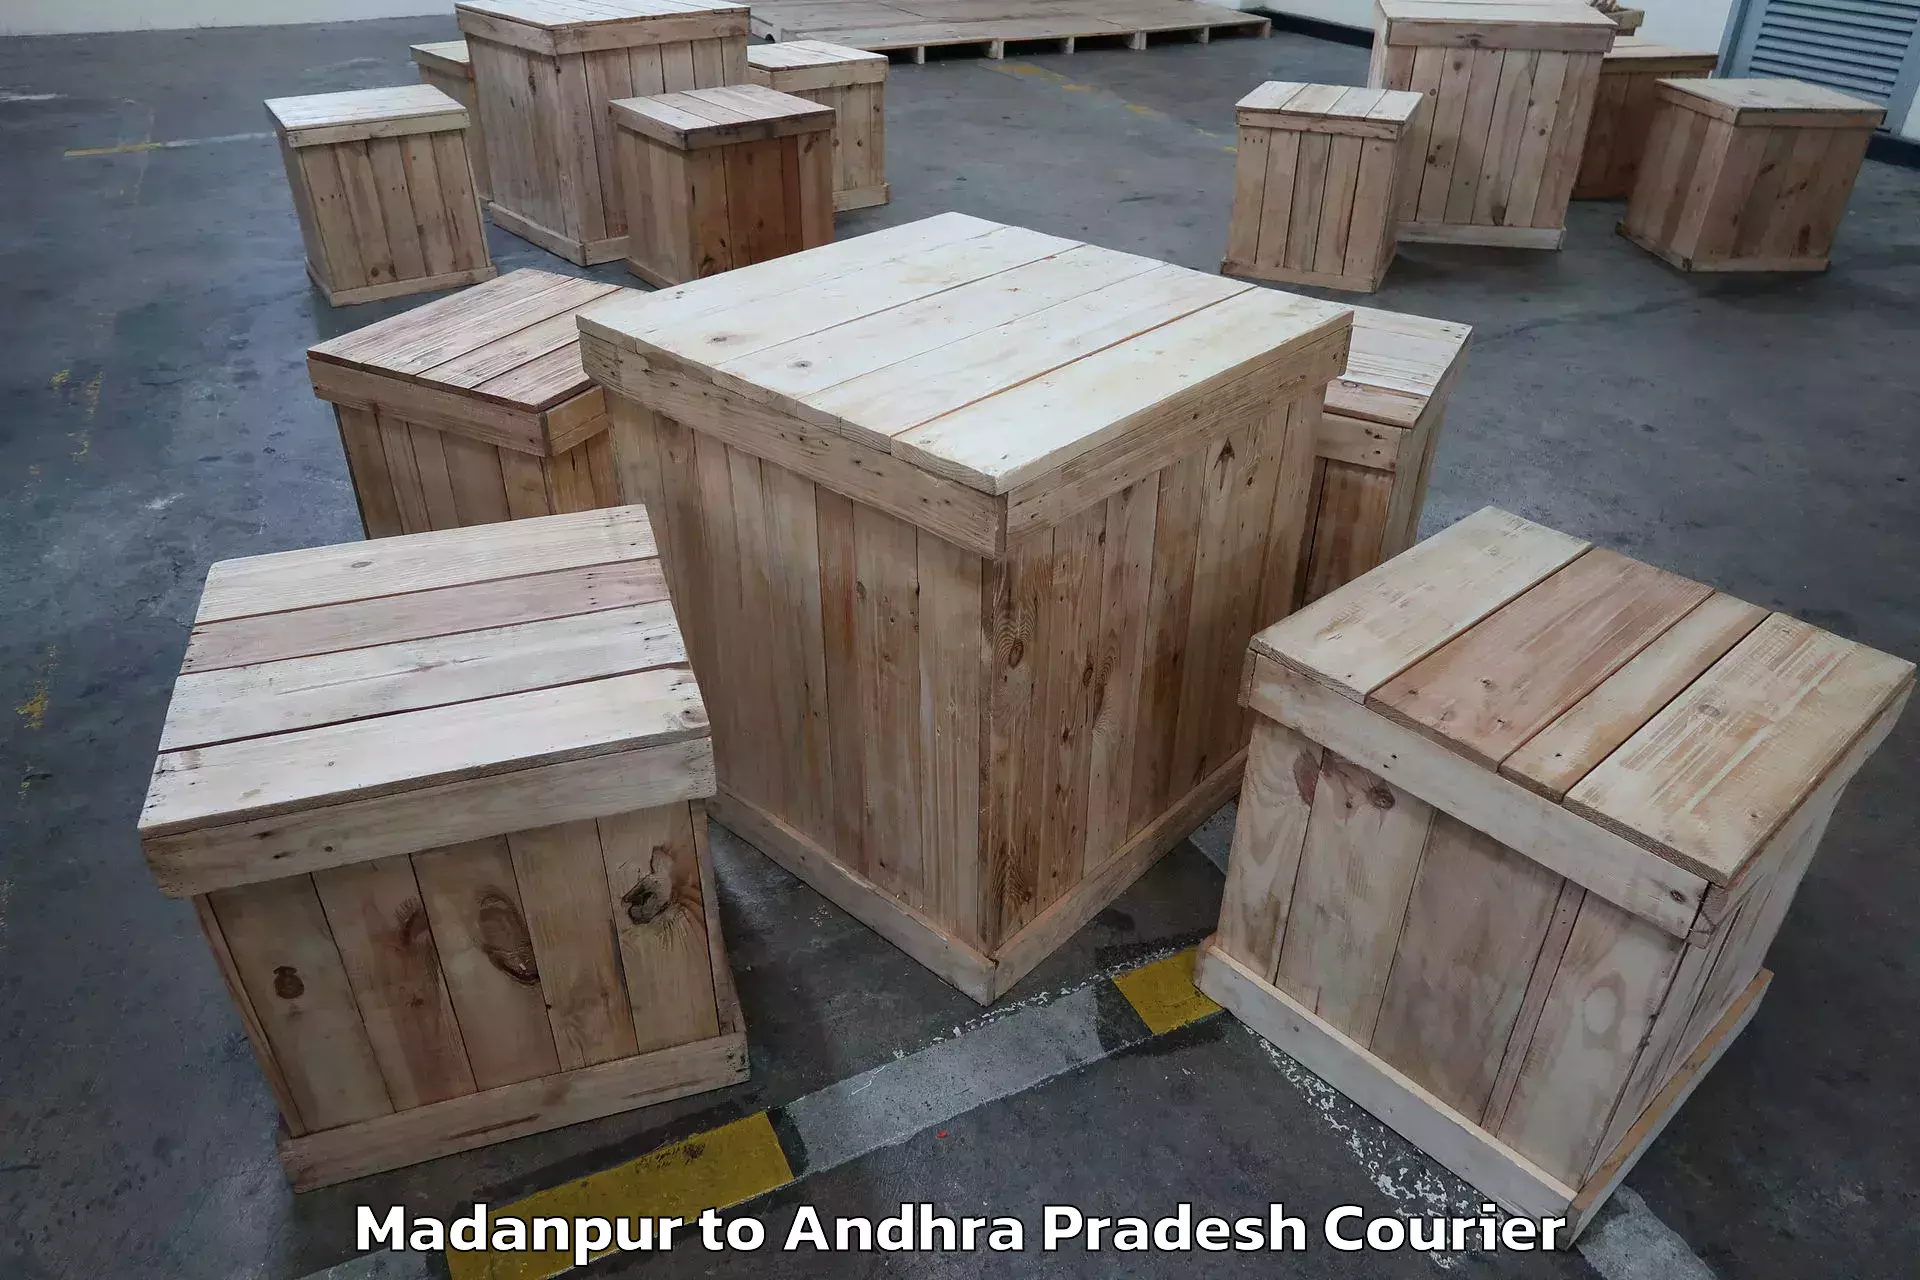 Budget-friendly movers Madanpur to Visakhapatnam Port